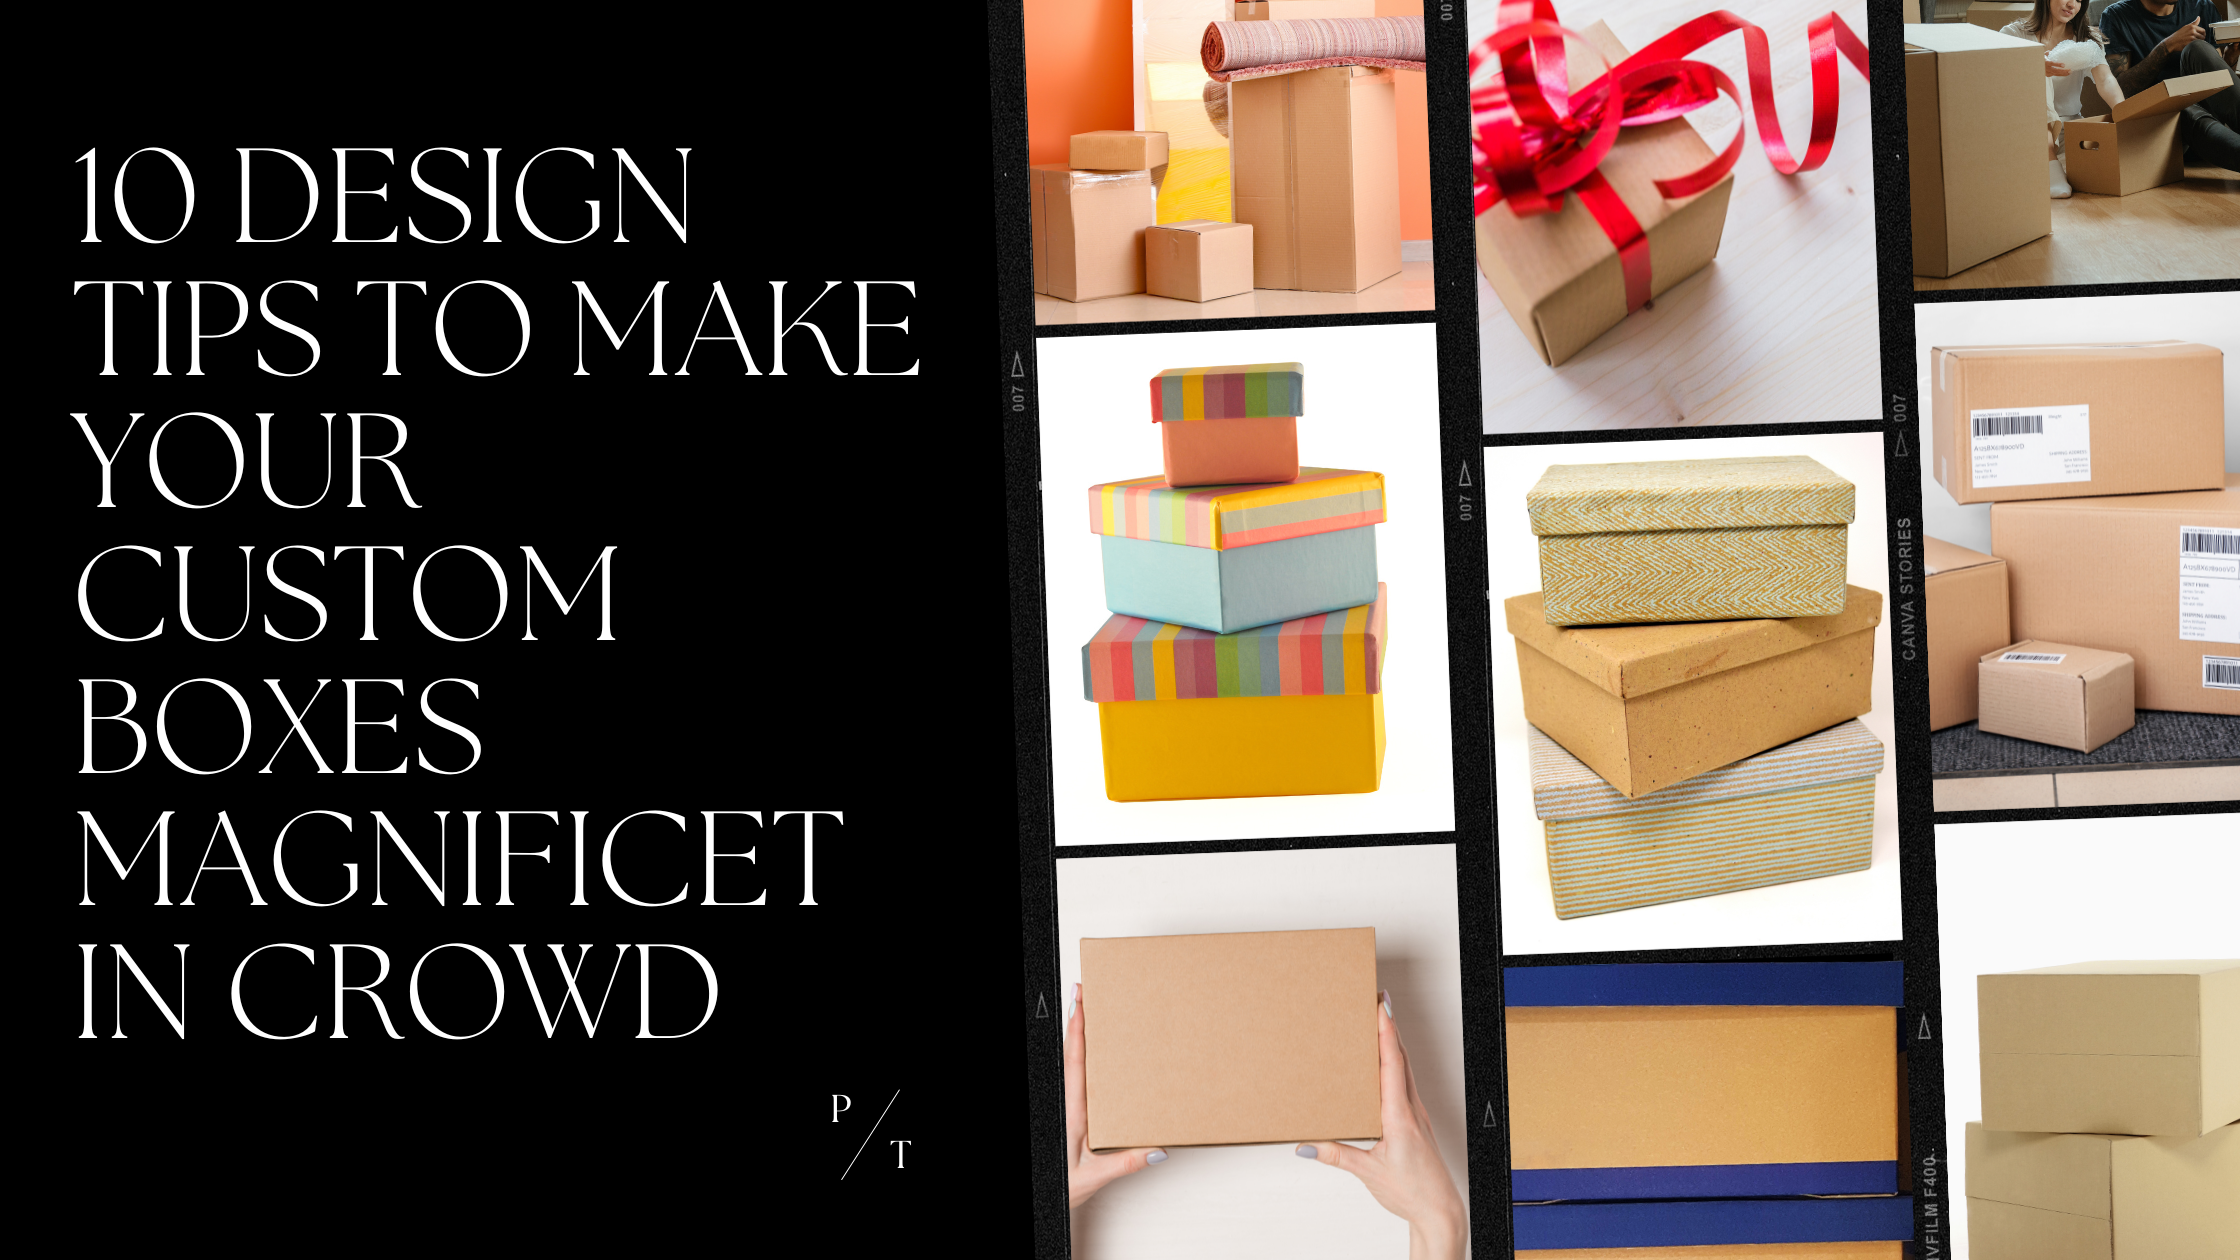 10 Design Tips to make your Custom Boxes Magnificent in Crowd